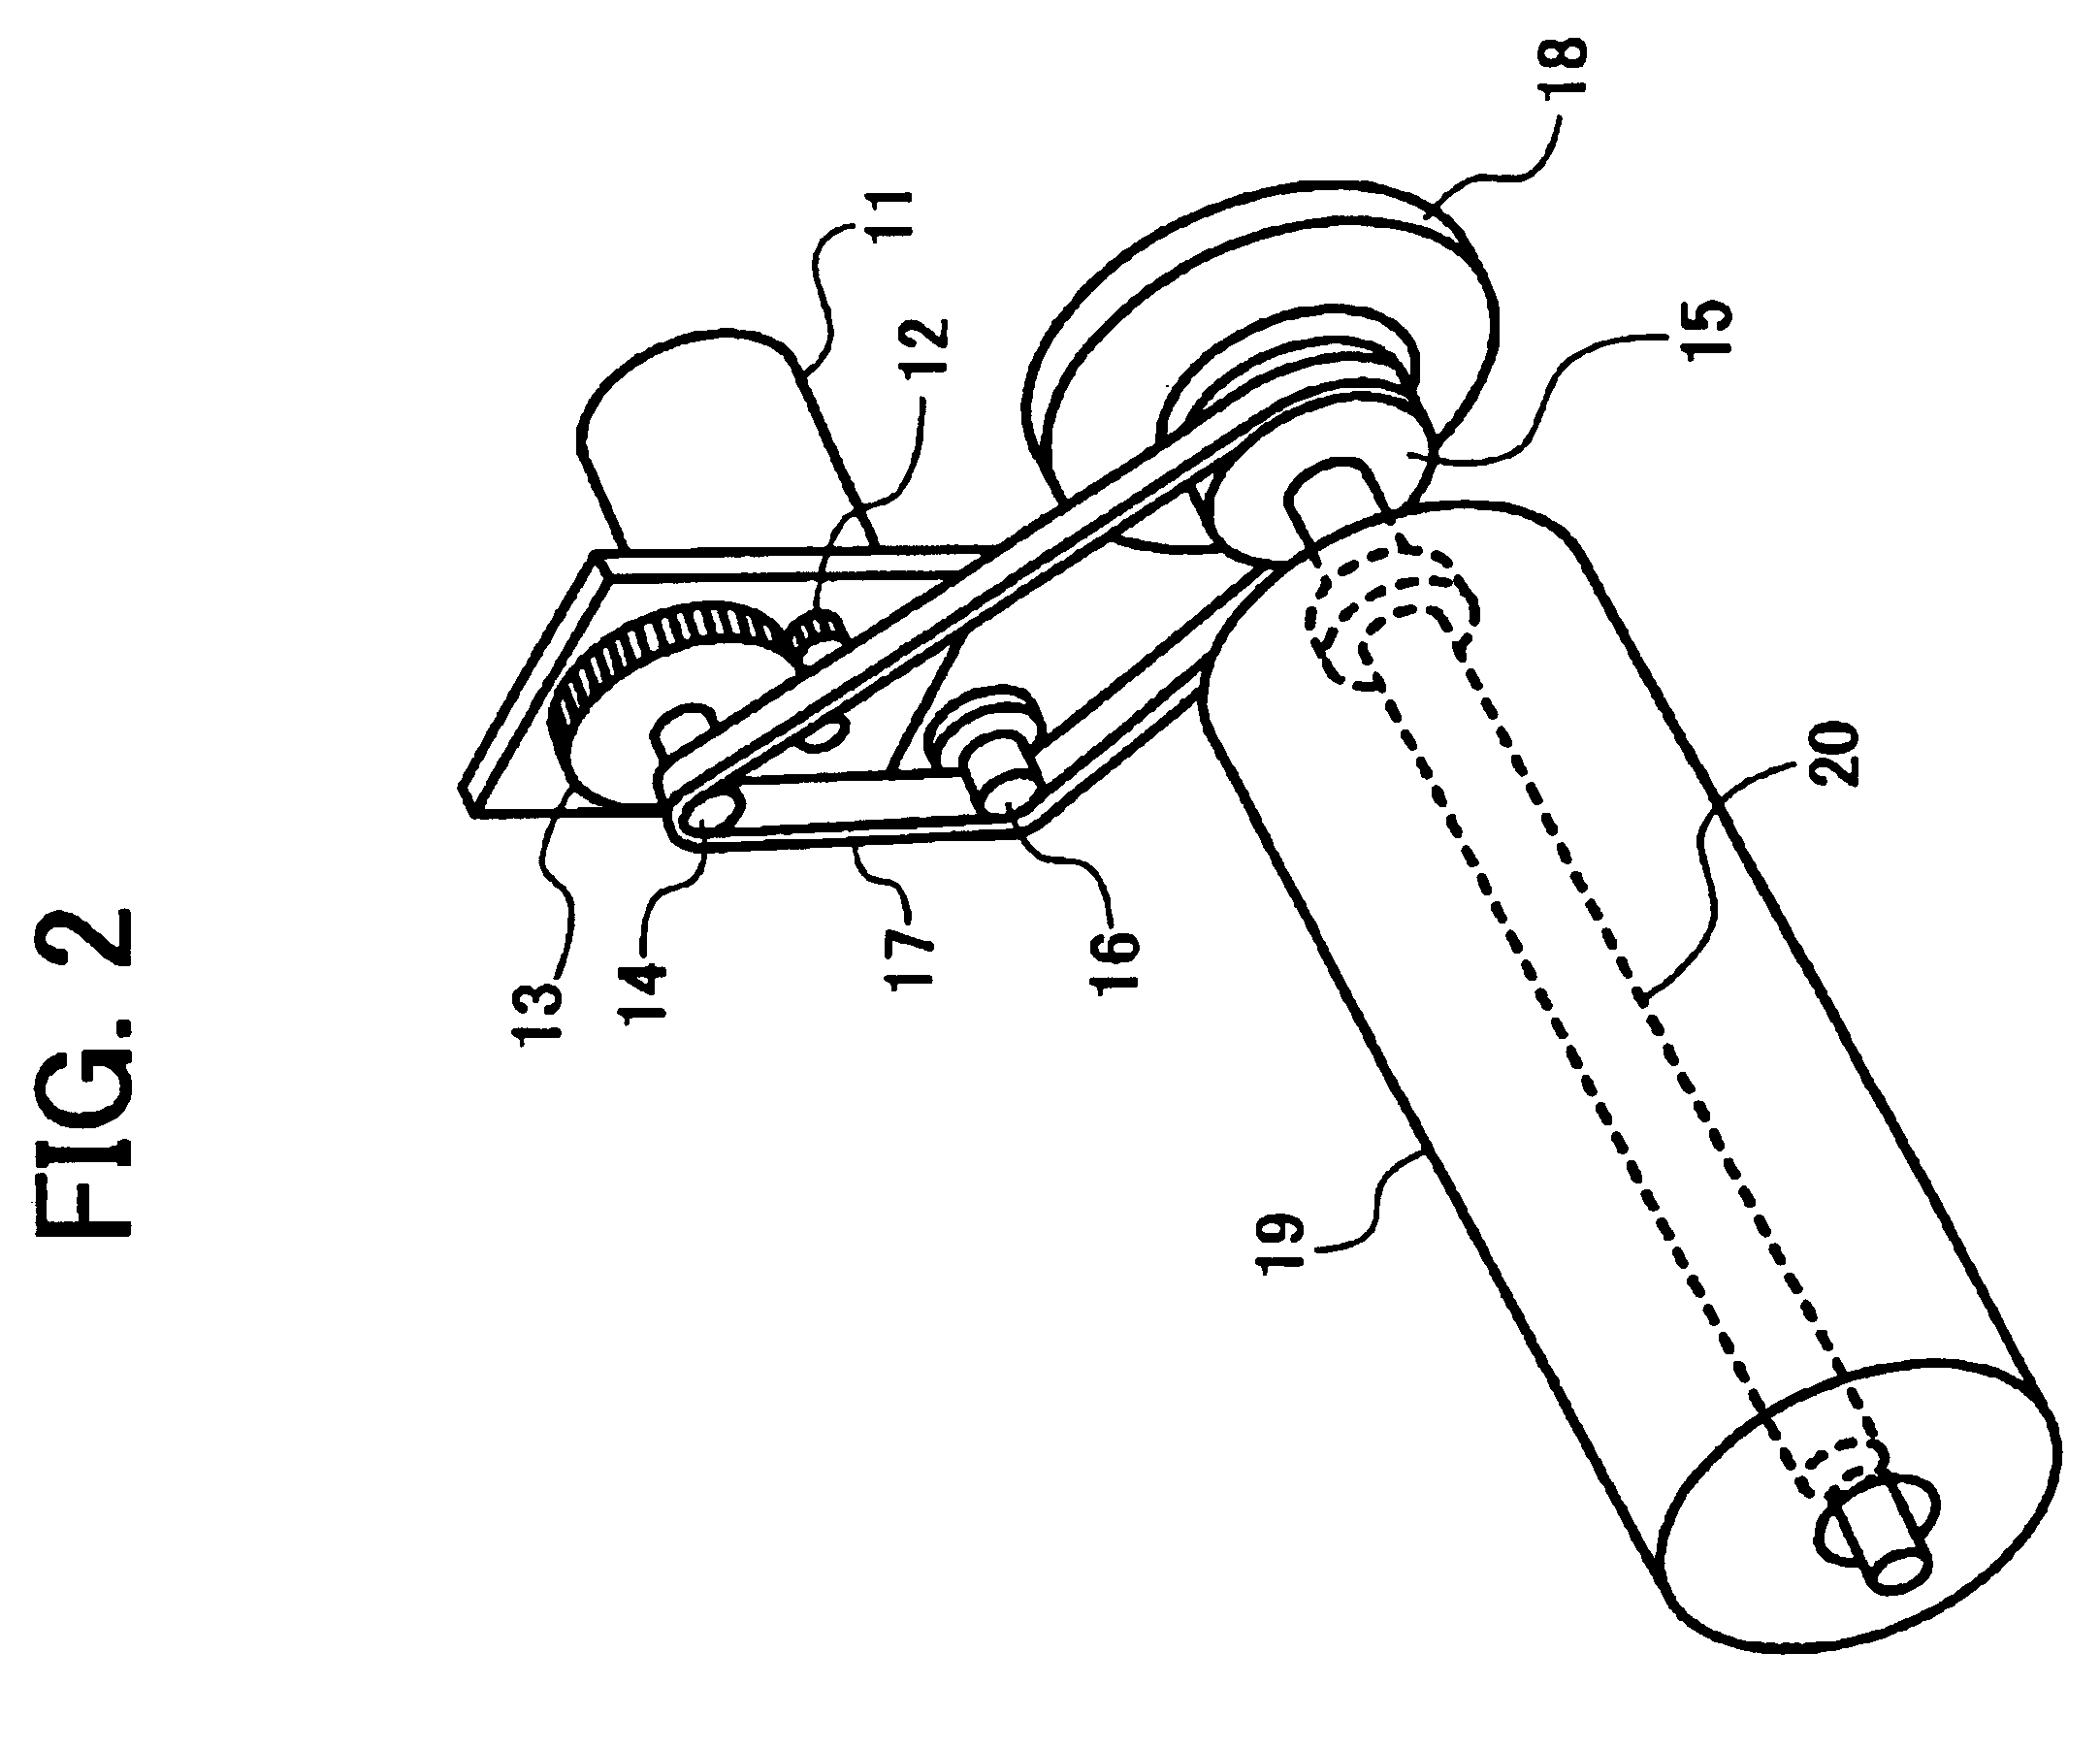 Apparatus for and method of driving motor to move object at a constant velocity